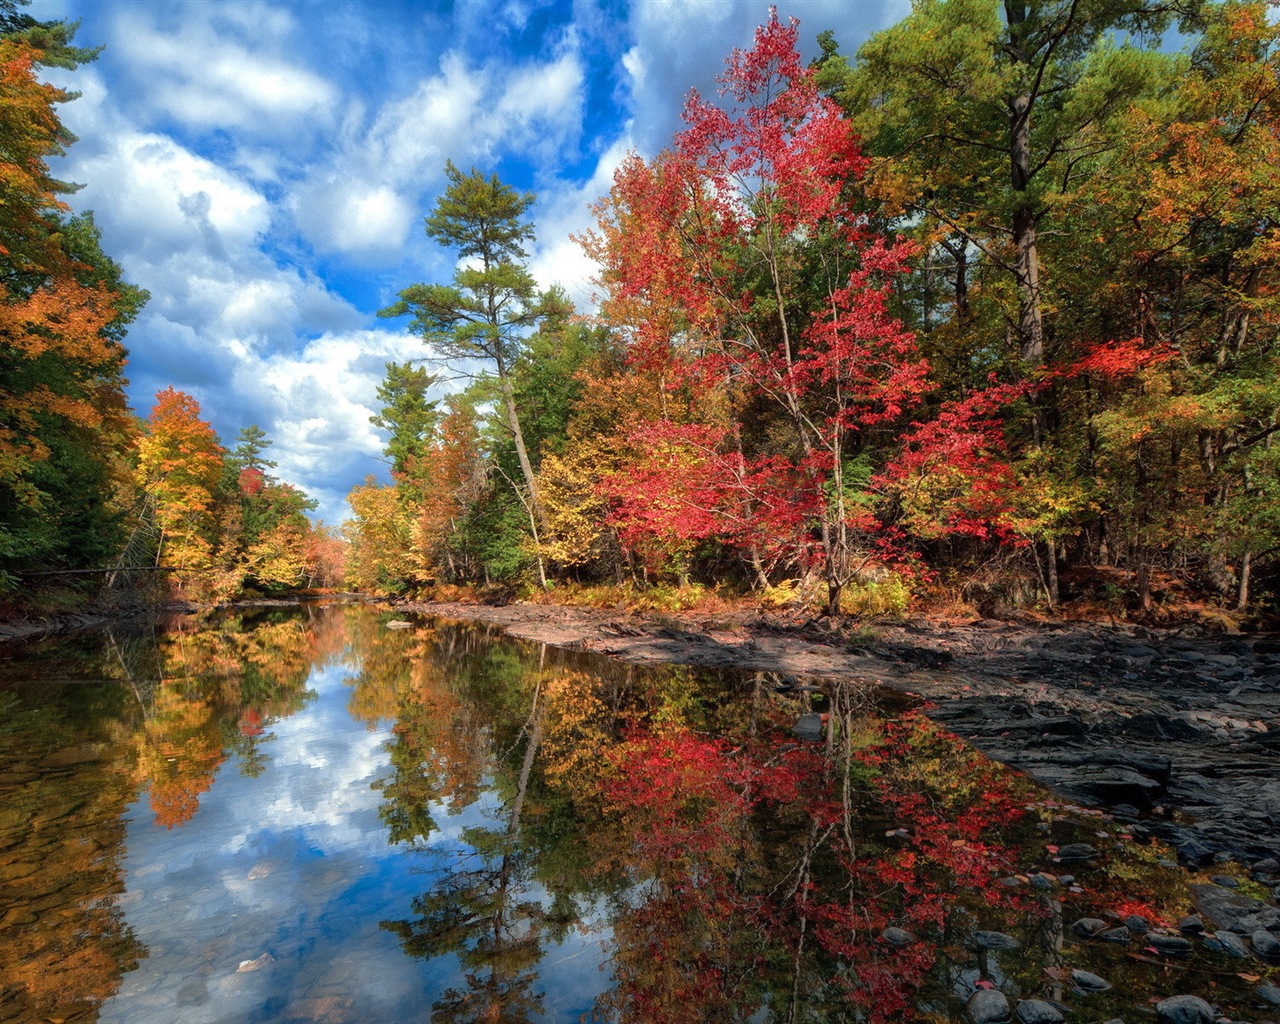 Water and trees in autumn HD wallpapers #4 - 1280x1024